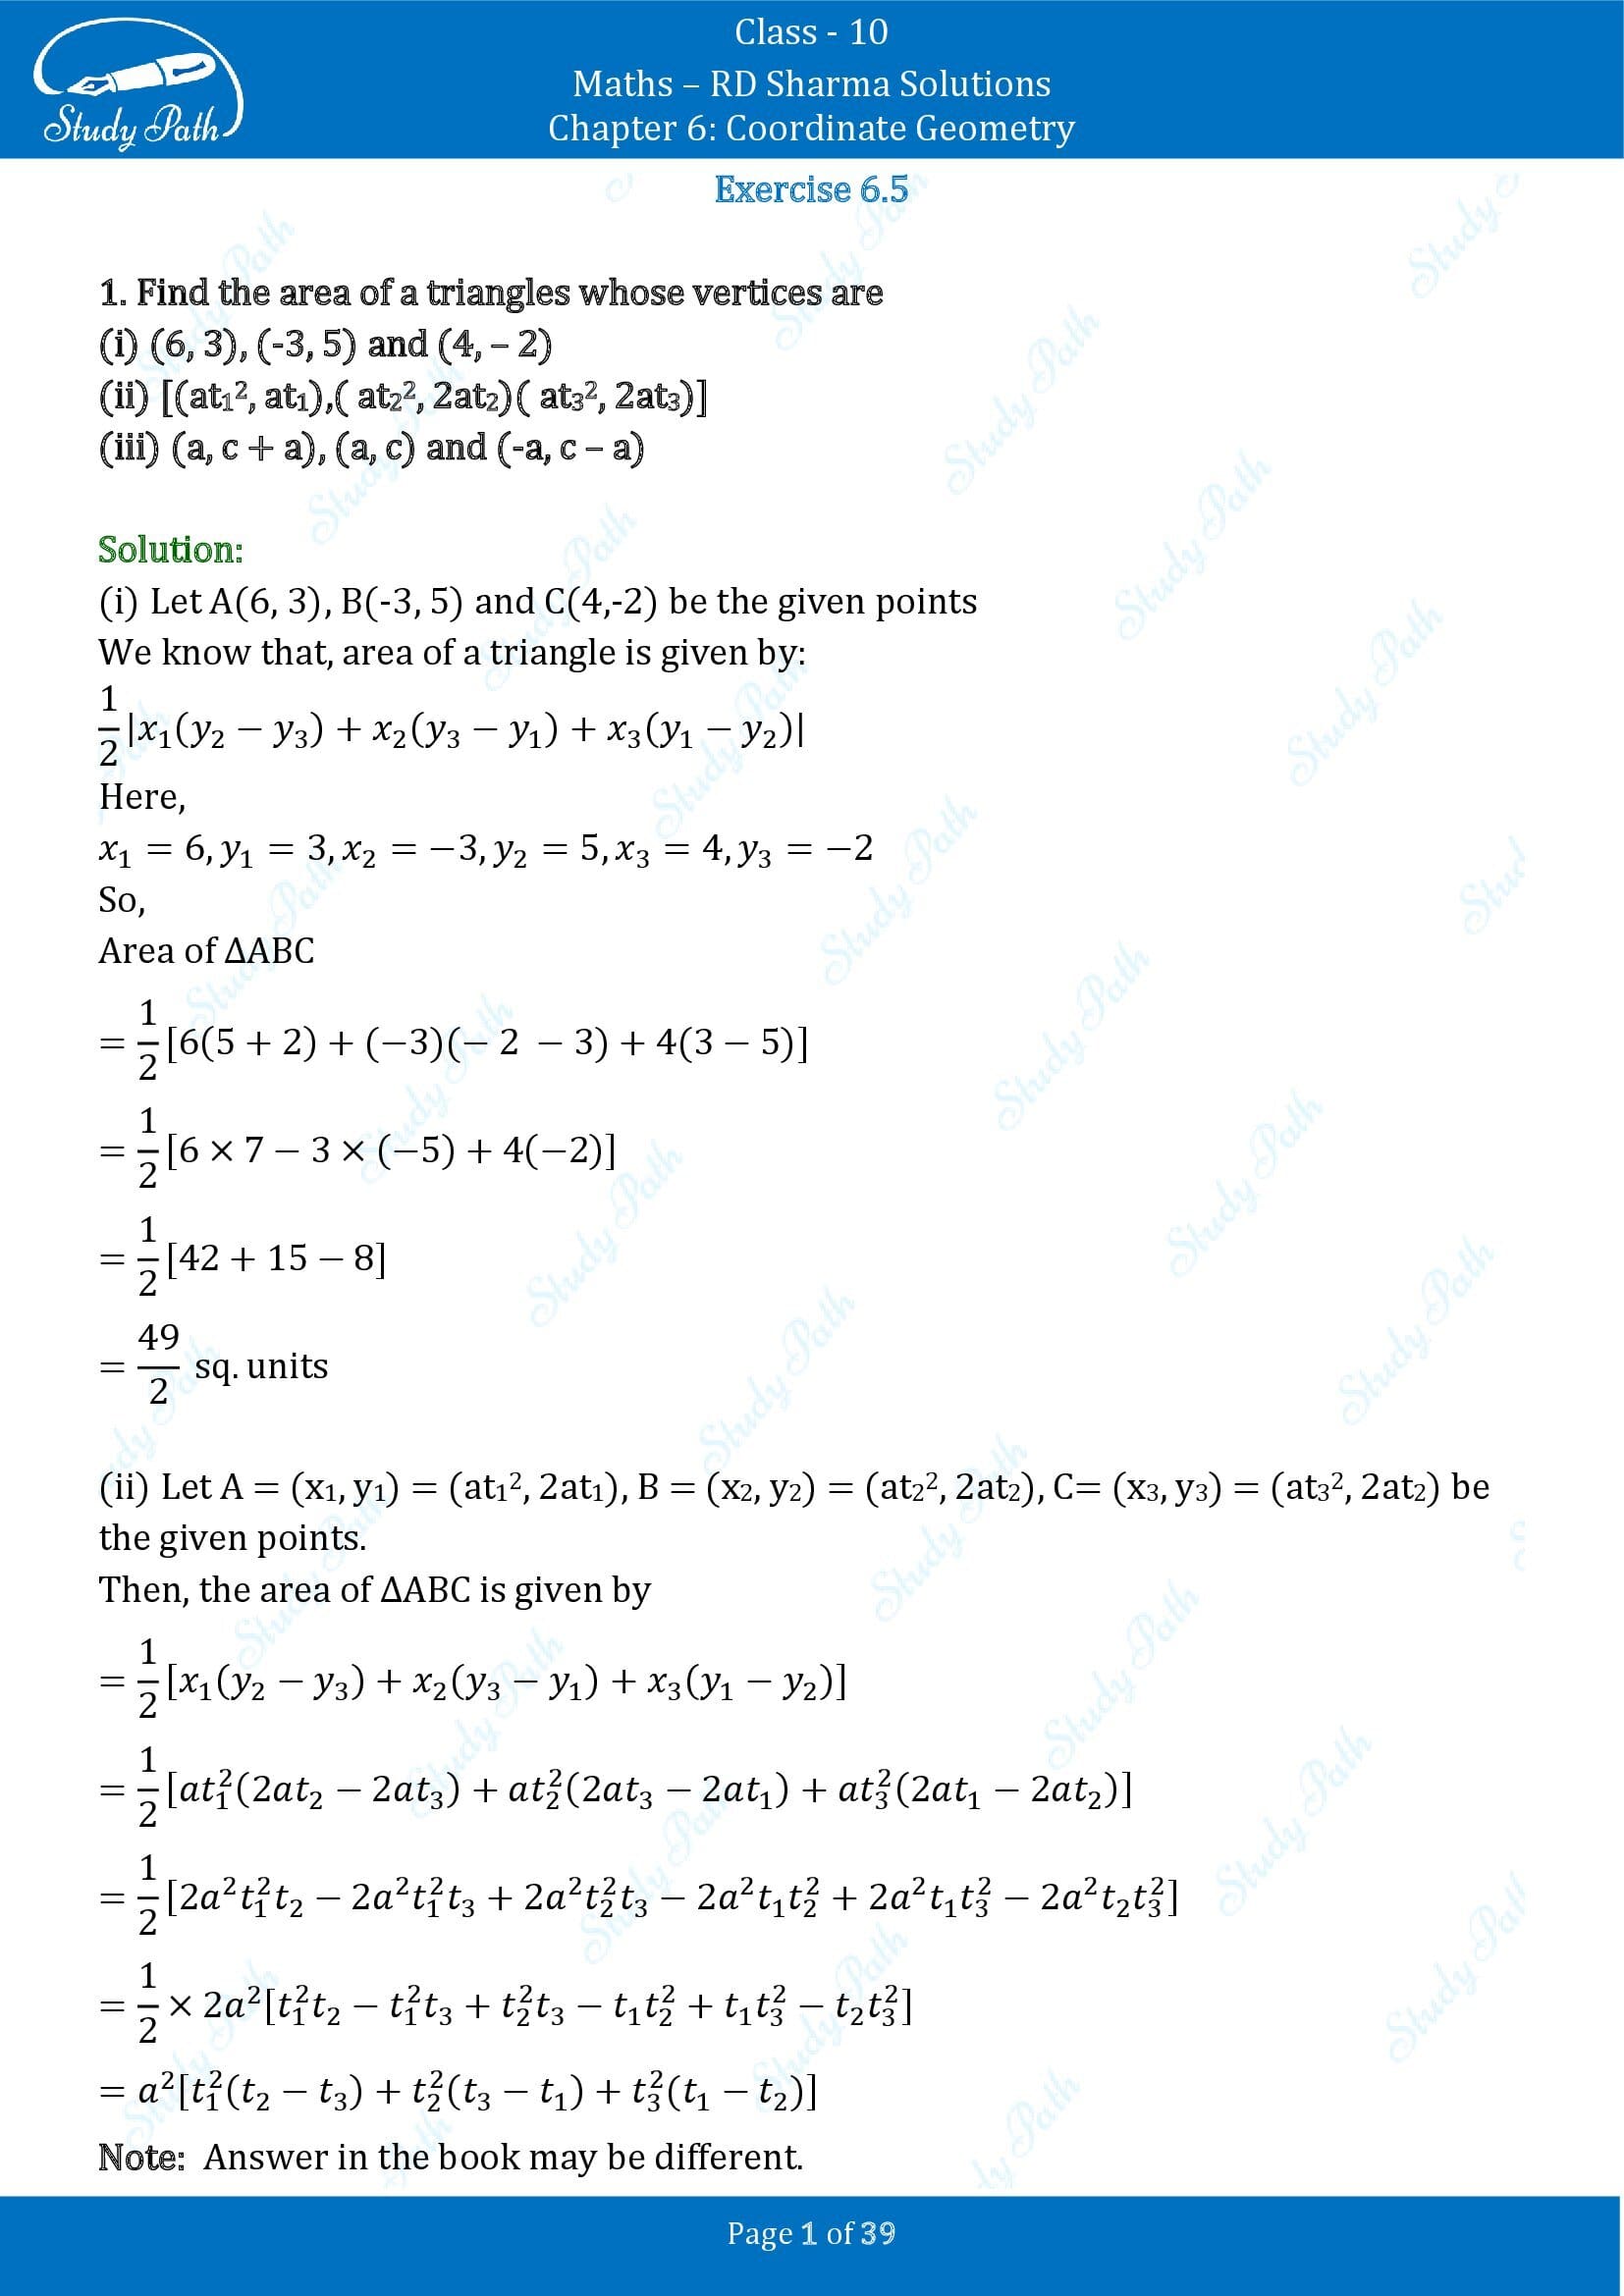 RD Sharma Solutions Class 10 Chapter 6 Coordinate Geometry Exercise 6.5 0001